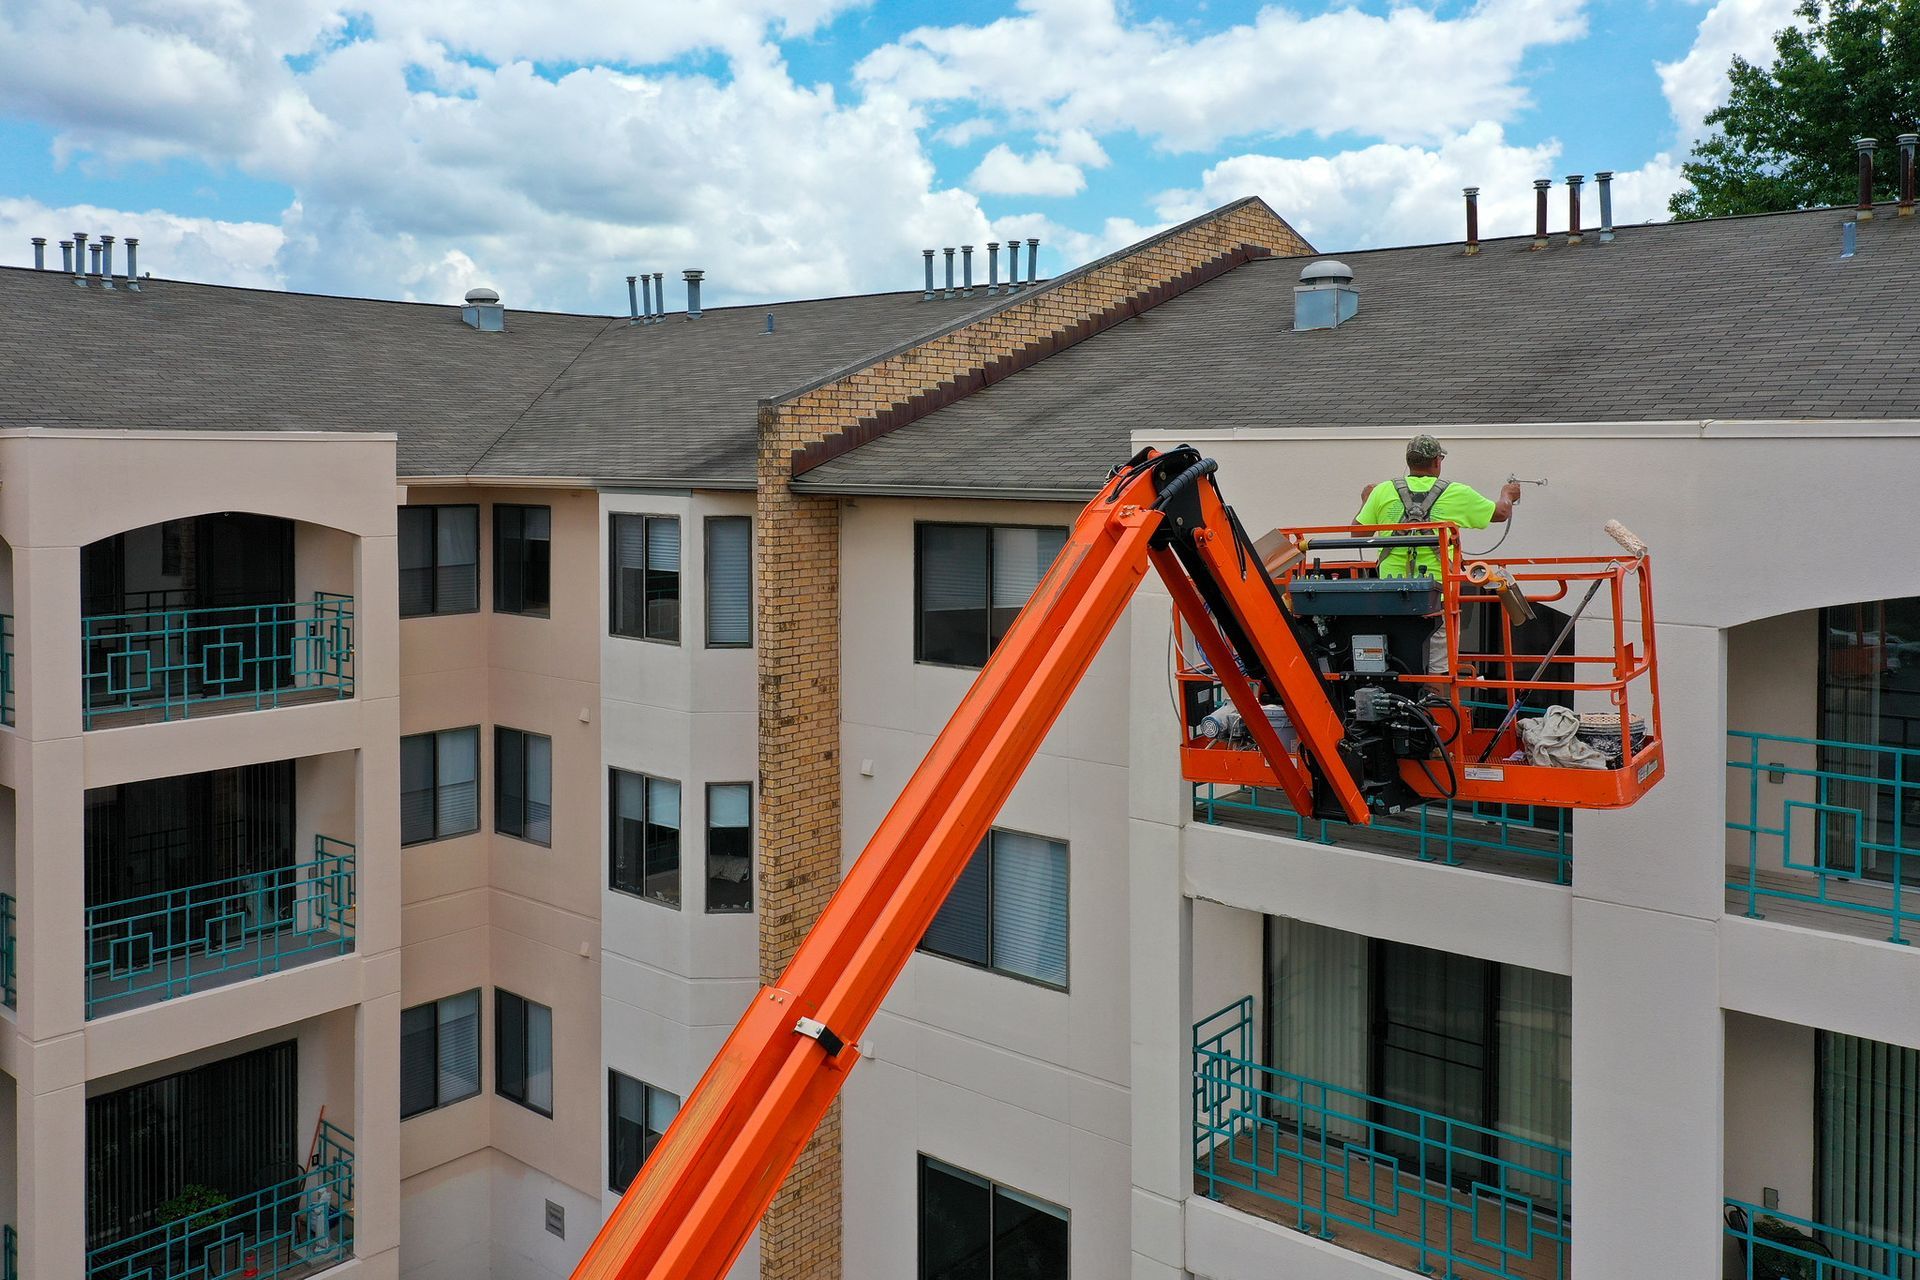 A man is working on the roof of a building with a crane.